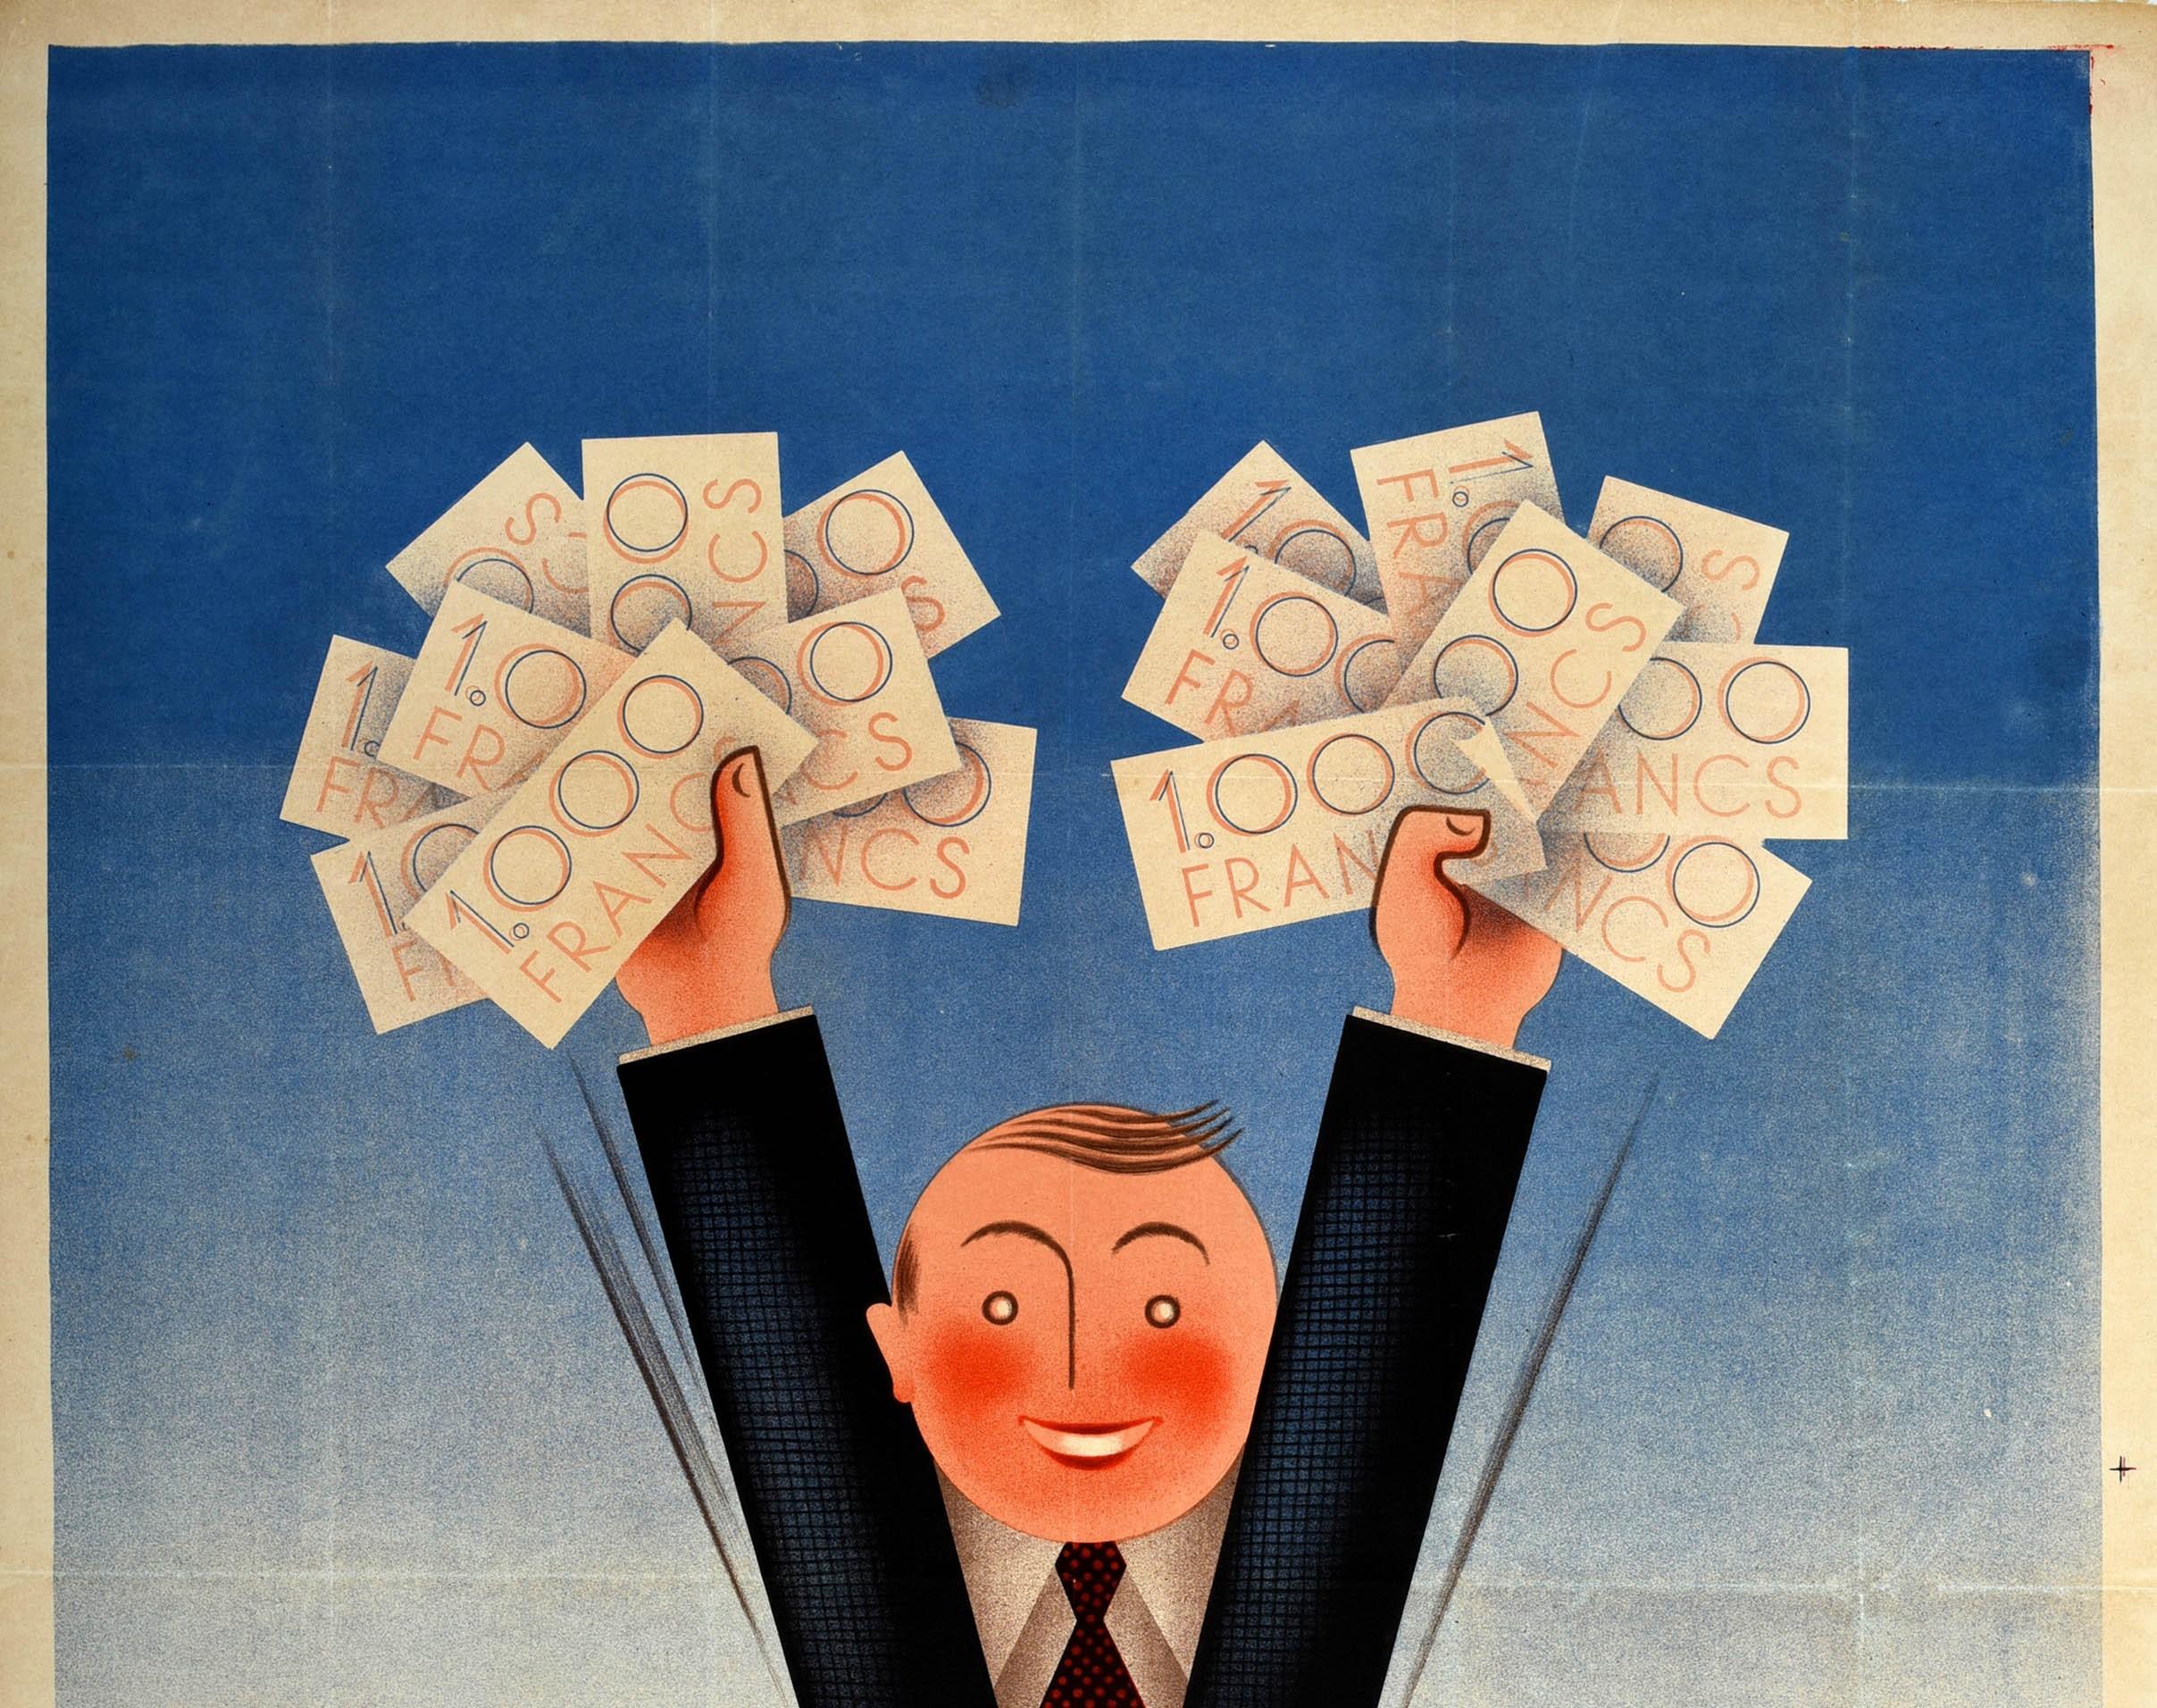 Original vintage advertising poster for the French National Lottery - Loterie Nationale - featuring a fun design depicting a smiling man in a suit jumping up in happiness and holding up notes of 1000 Francs in both hands. Artwork by Edgar Derouet